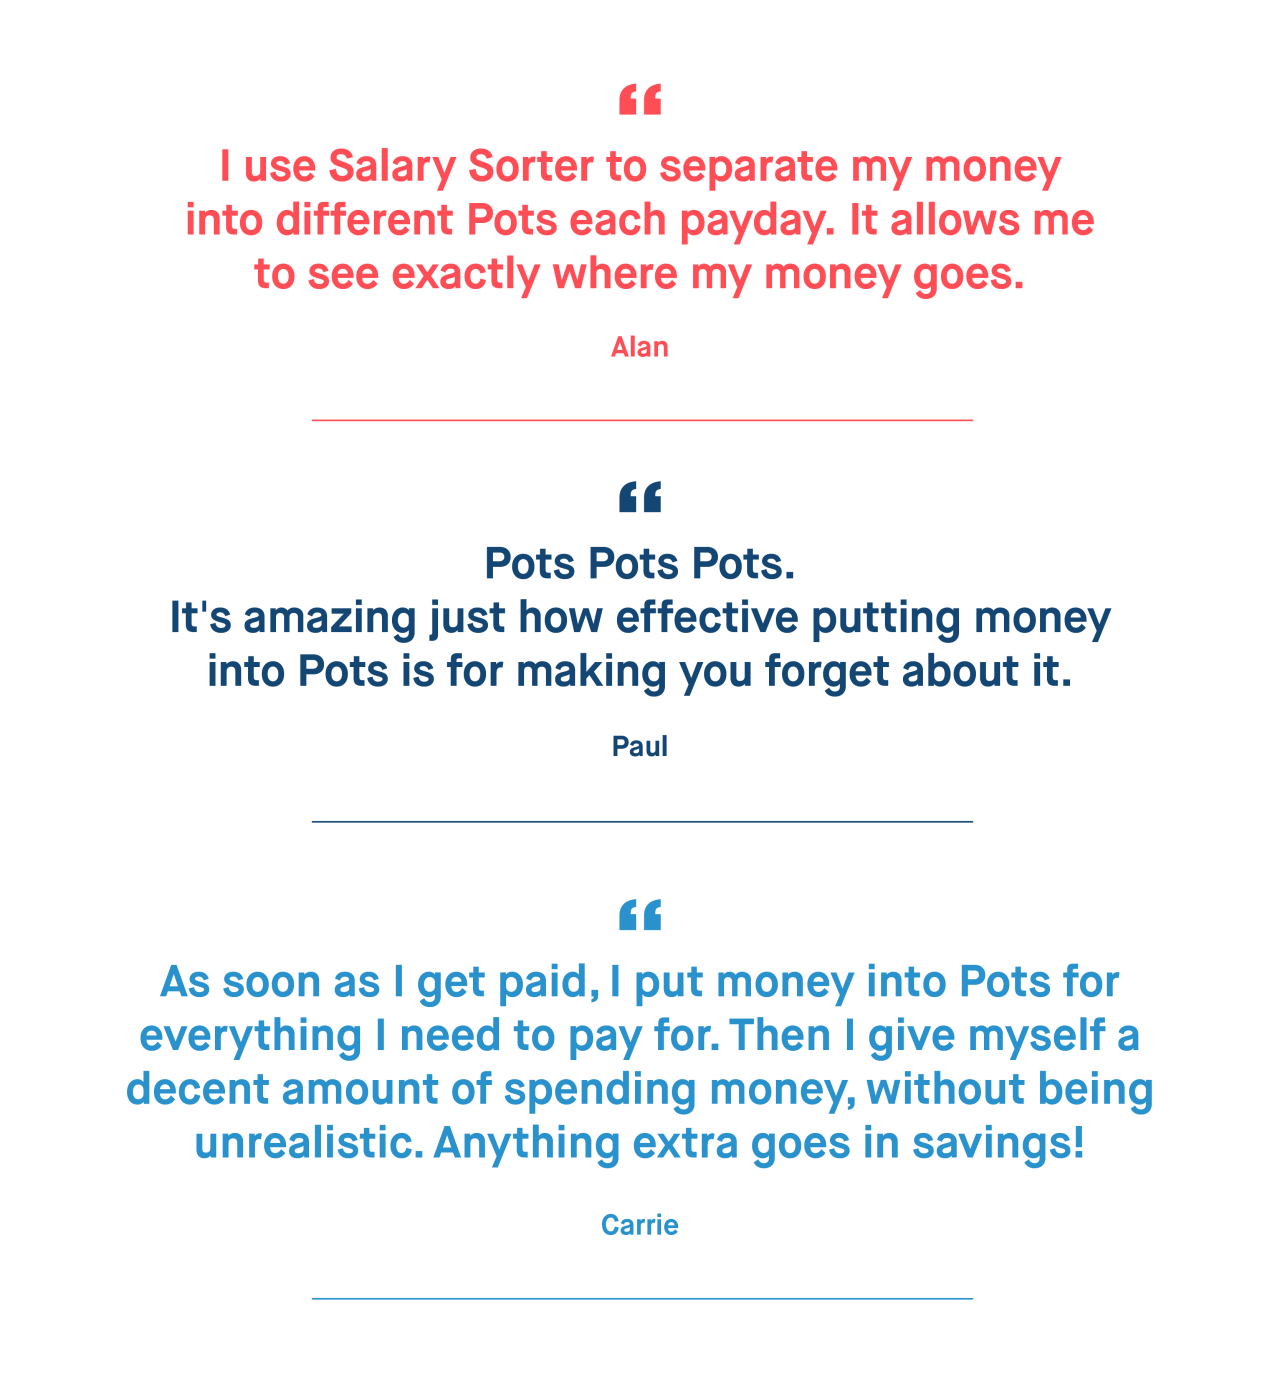 Alan – I use Salary Sorter to separate my money into different Pots each payday. It allows me to see exactly where my money goes.

Paul – Pots Pots Pots. It's amazing just how effective putting money into Pots is for making you forget about it. 

Carrie – As soon as I get paid, I put money into Pots for everything I need to pay for. Then I give myself a decent amount of spending money, without being unrealistic. Anything extra goes in savings!
